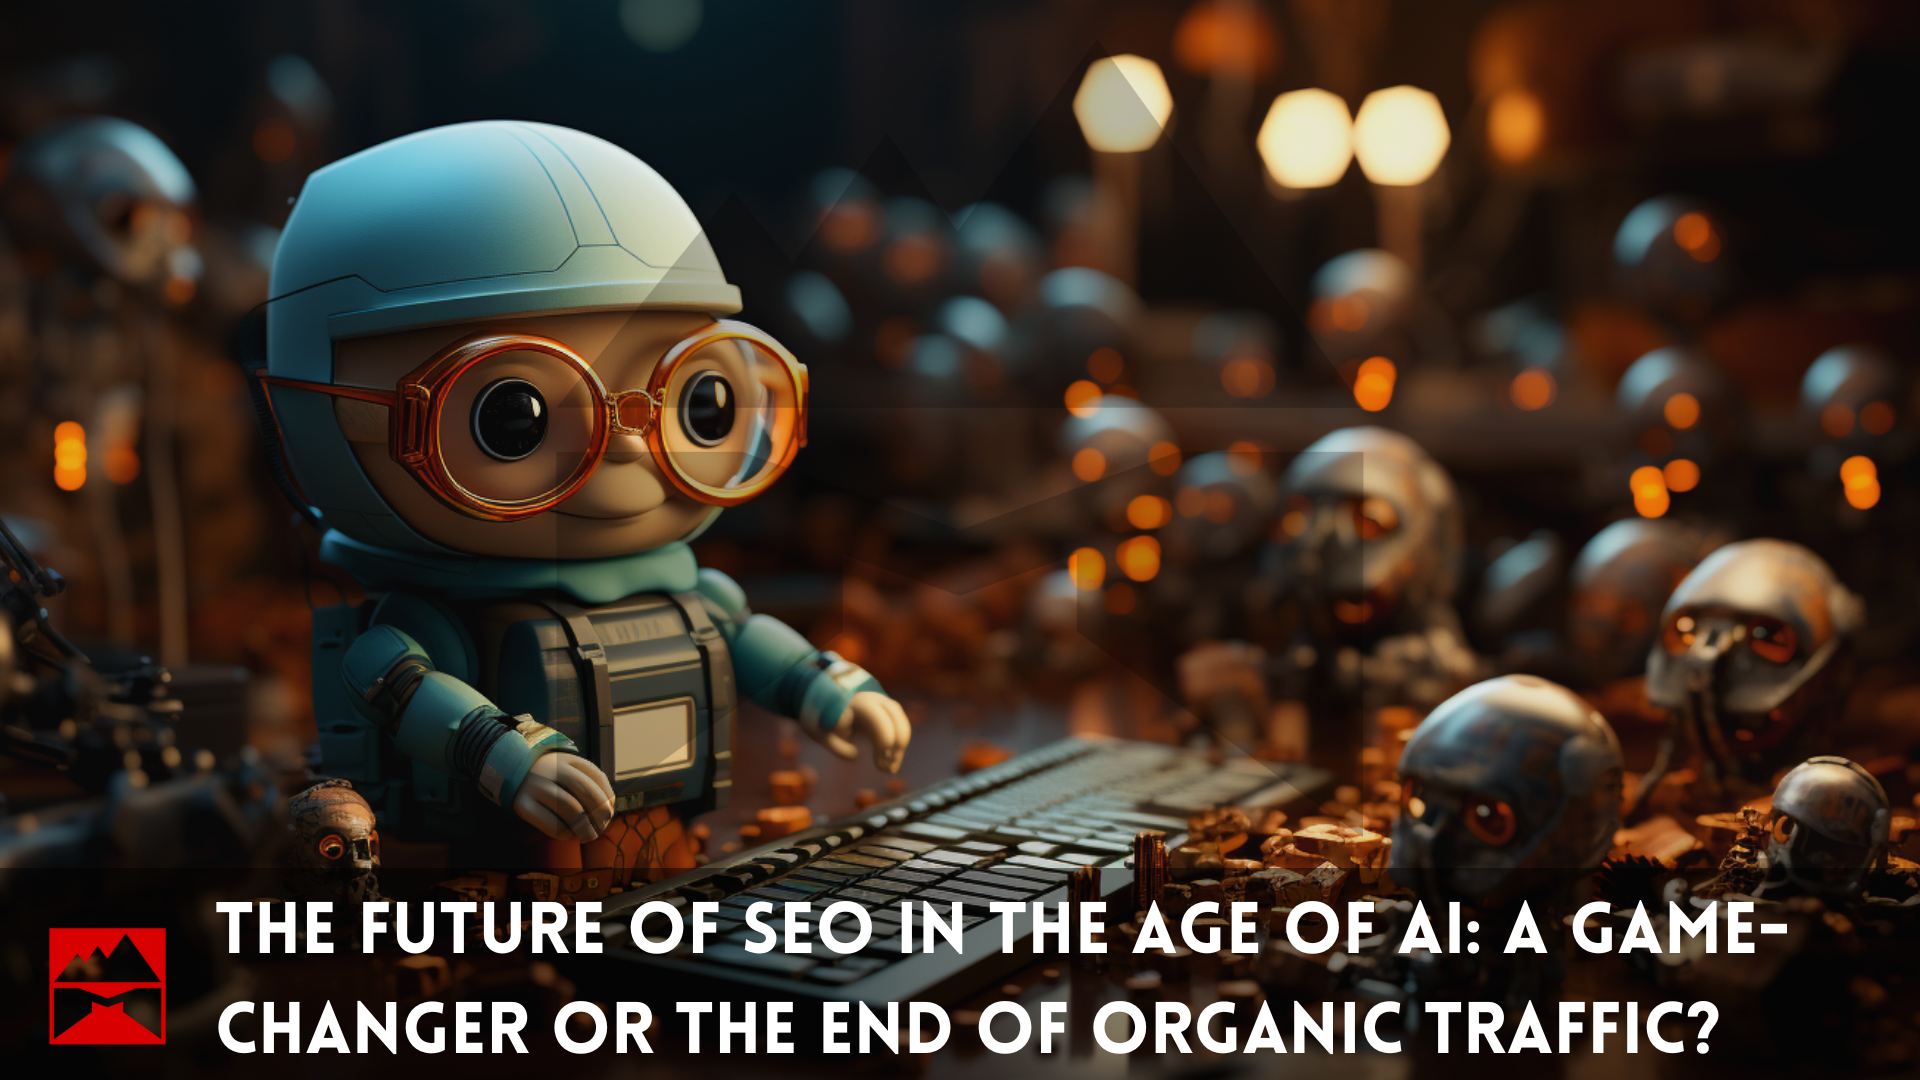 The Future of SEO in the Age of AI: A Game-Changer or the End of Organic Traffic?